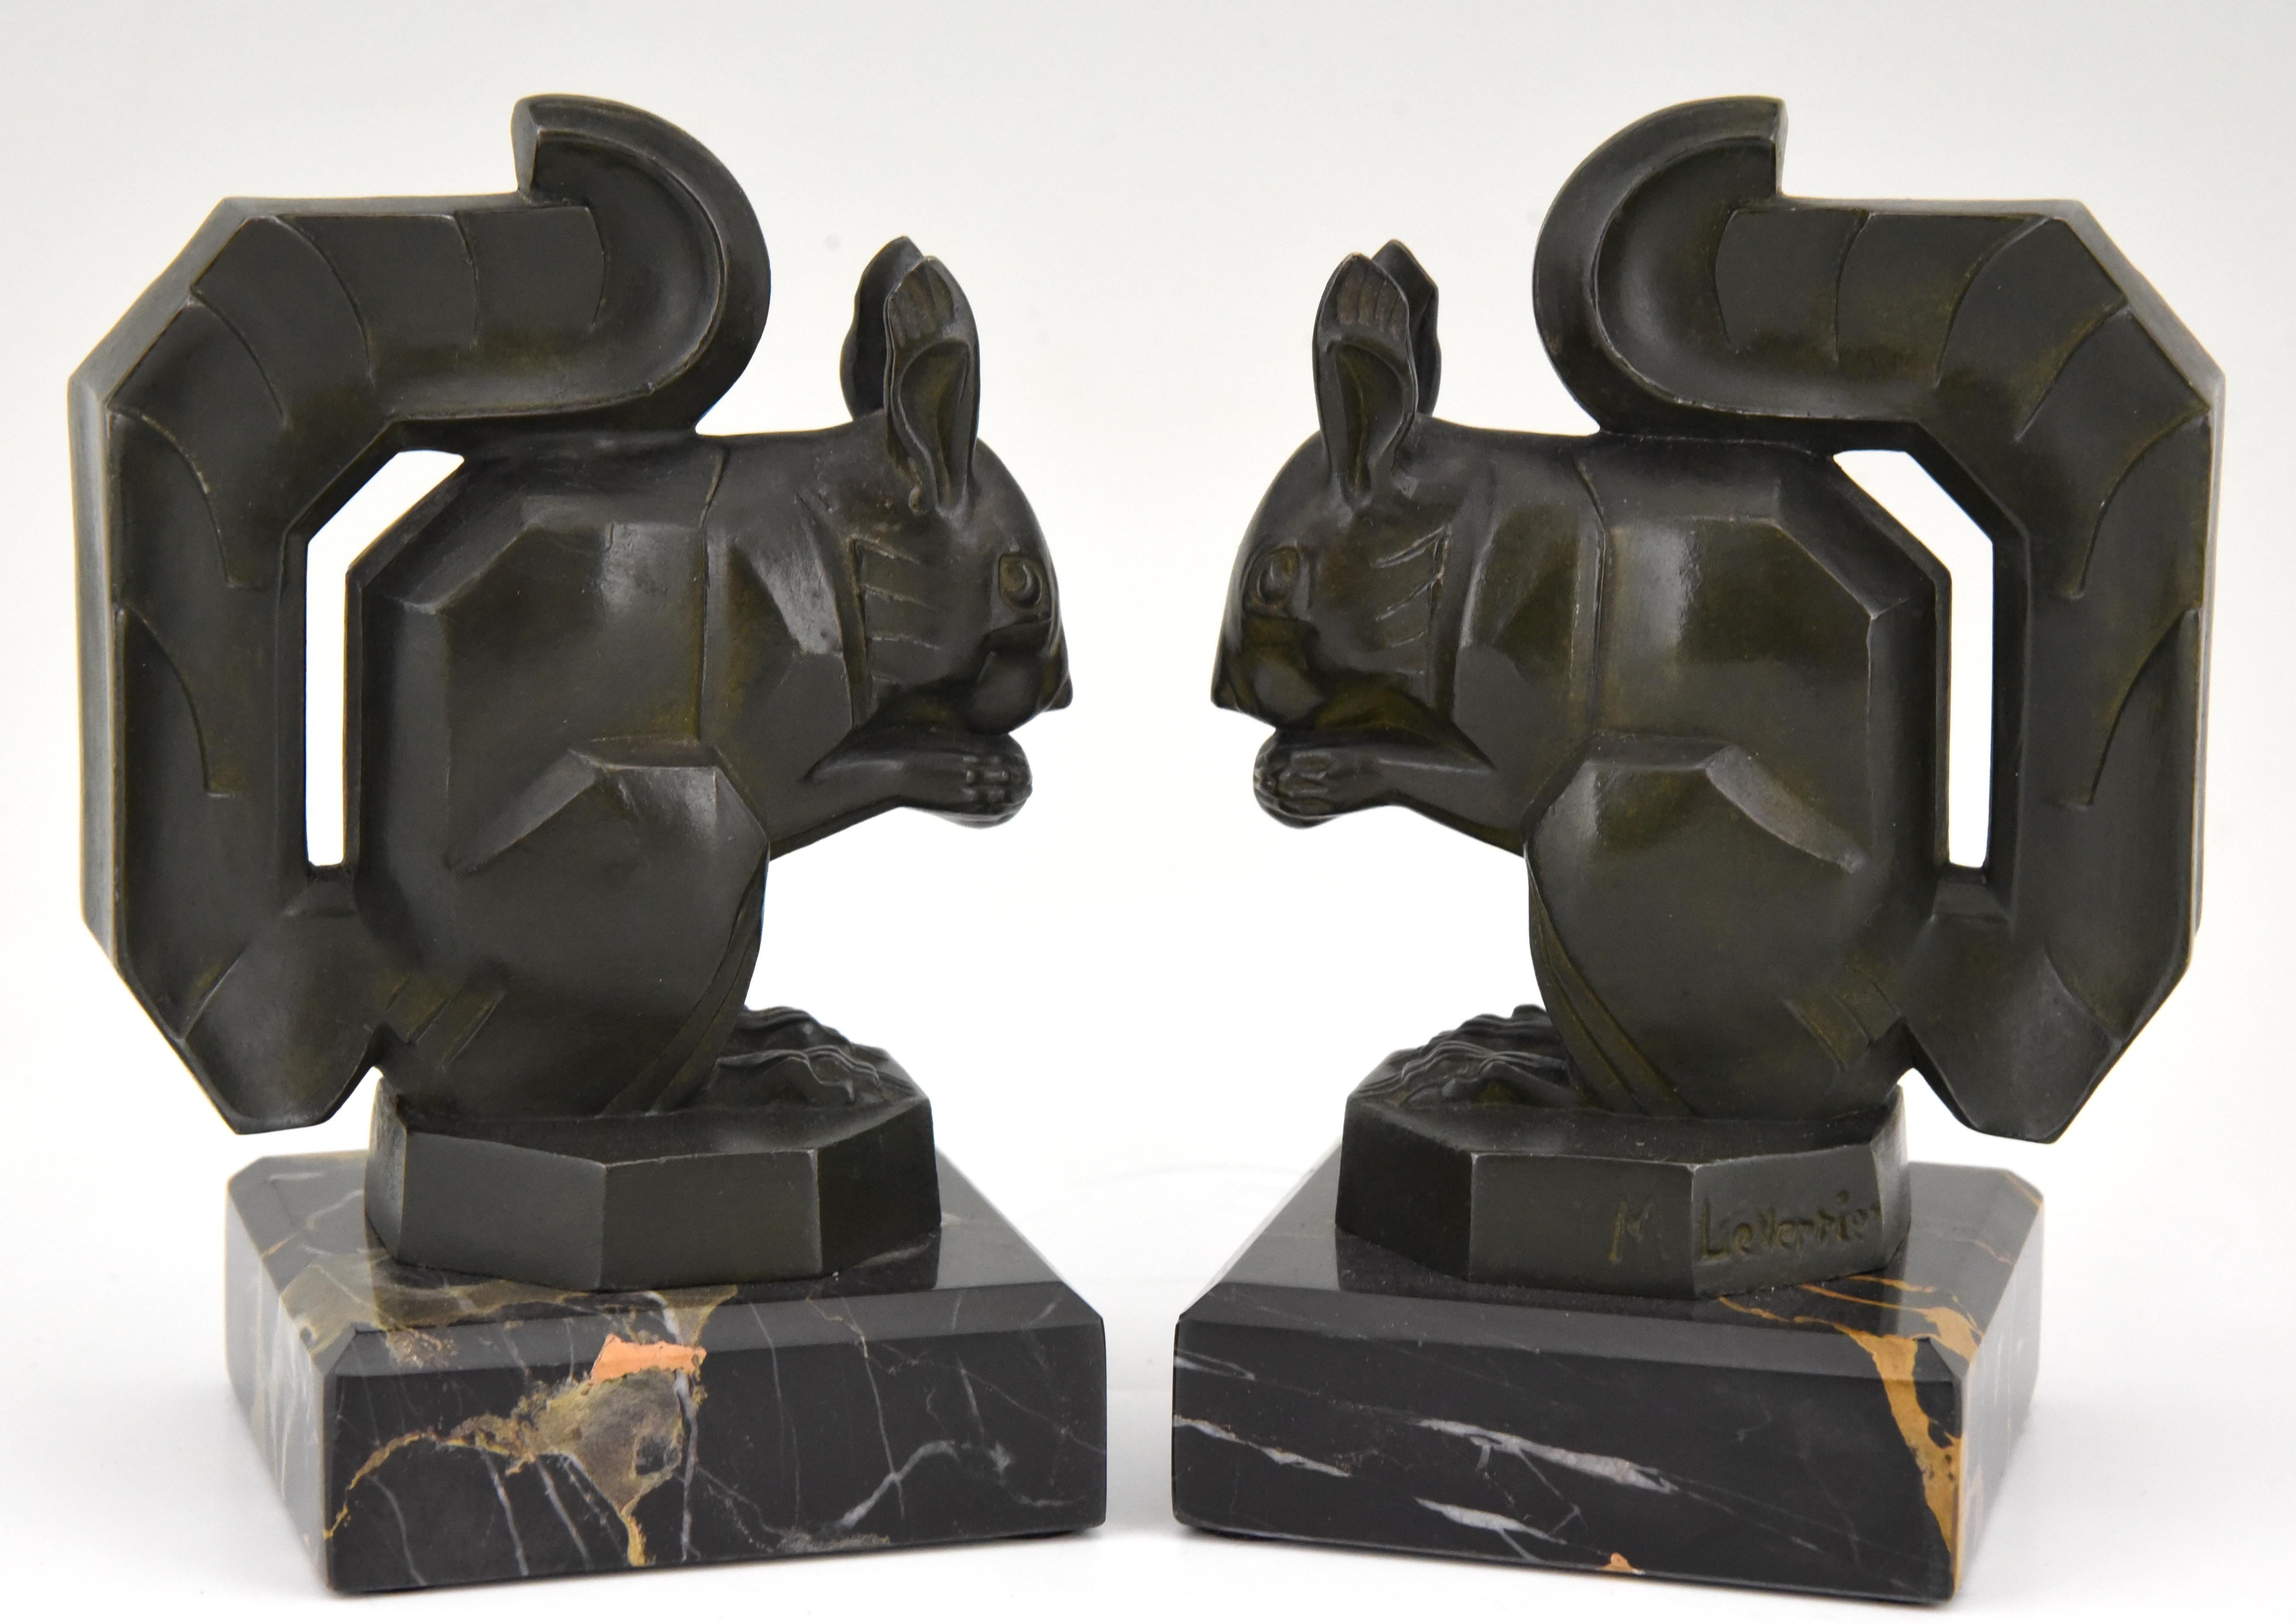 Art Deco bookends modelled as squirrels eating a nut signed by the French artist Max Le Verrier cast in art metal with lovely dark green patina on a Portor marble base, circa 1930.
Literature:
“Art deco sculpture” by Victor Arwas, Academy.